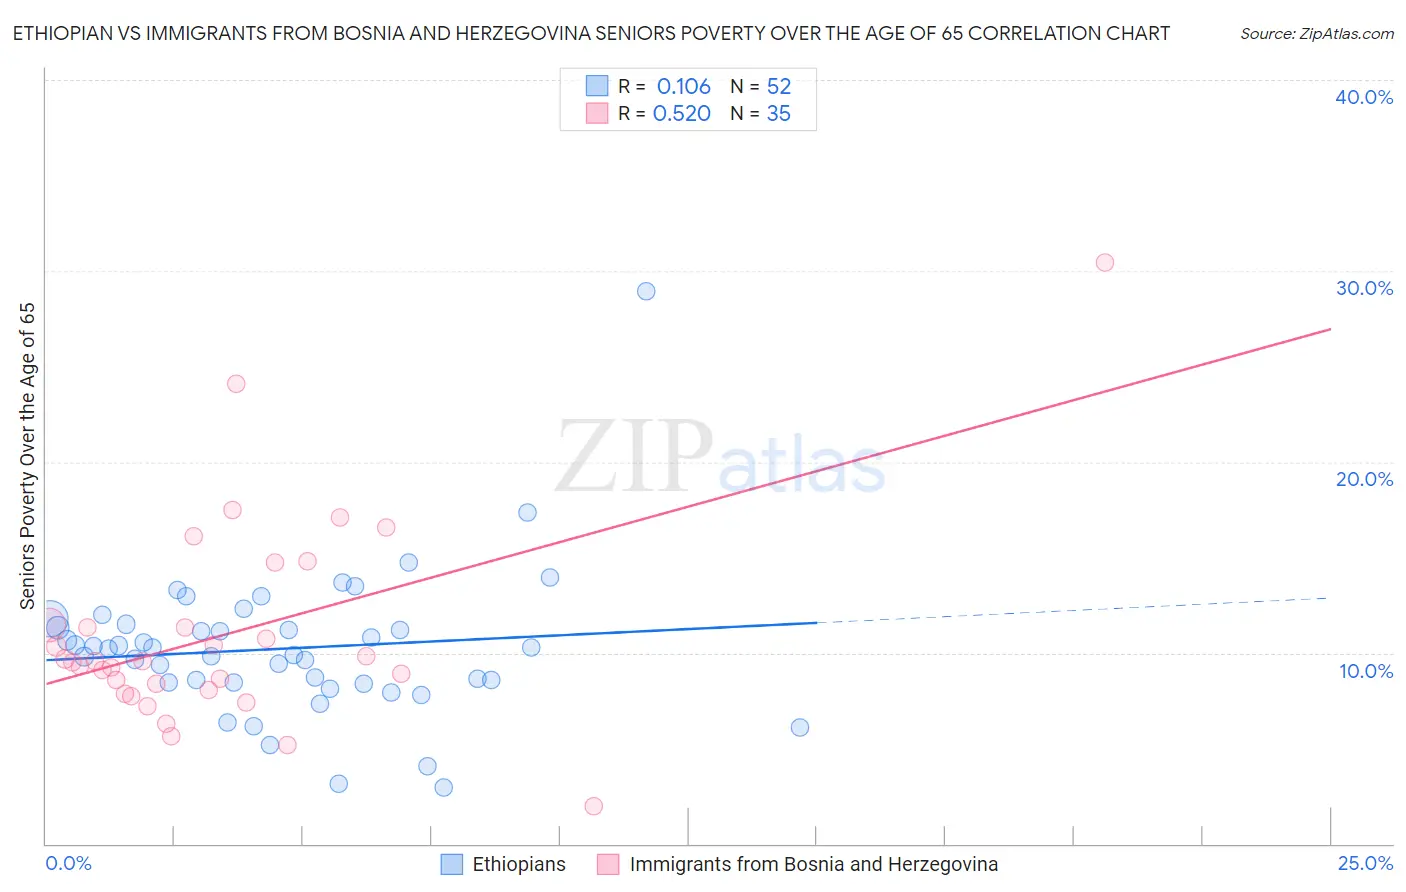 Ethiopian vs Immigrants from Bosnia and Herzegovina Seniors Poverty Over the Age of 65